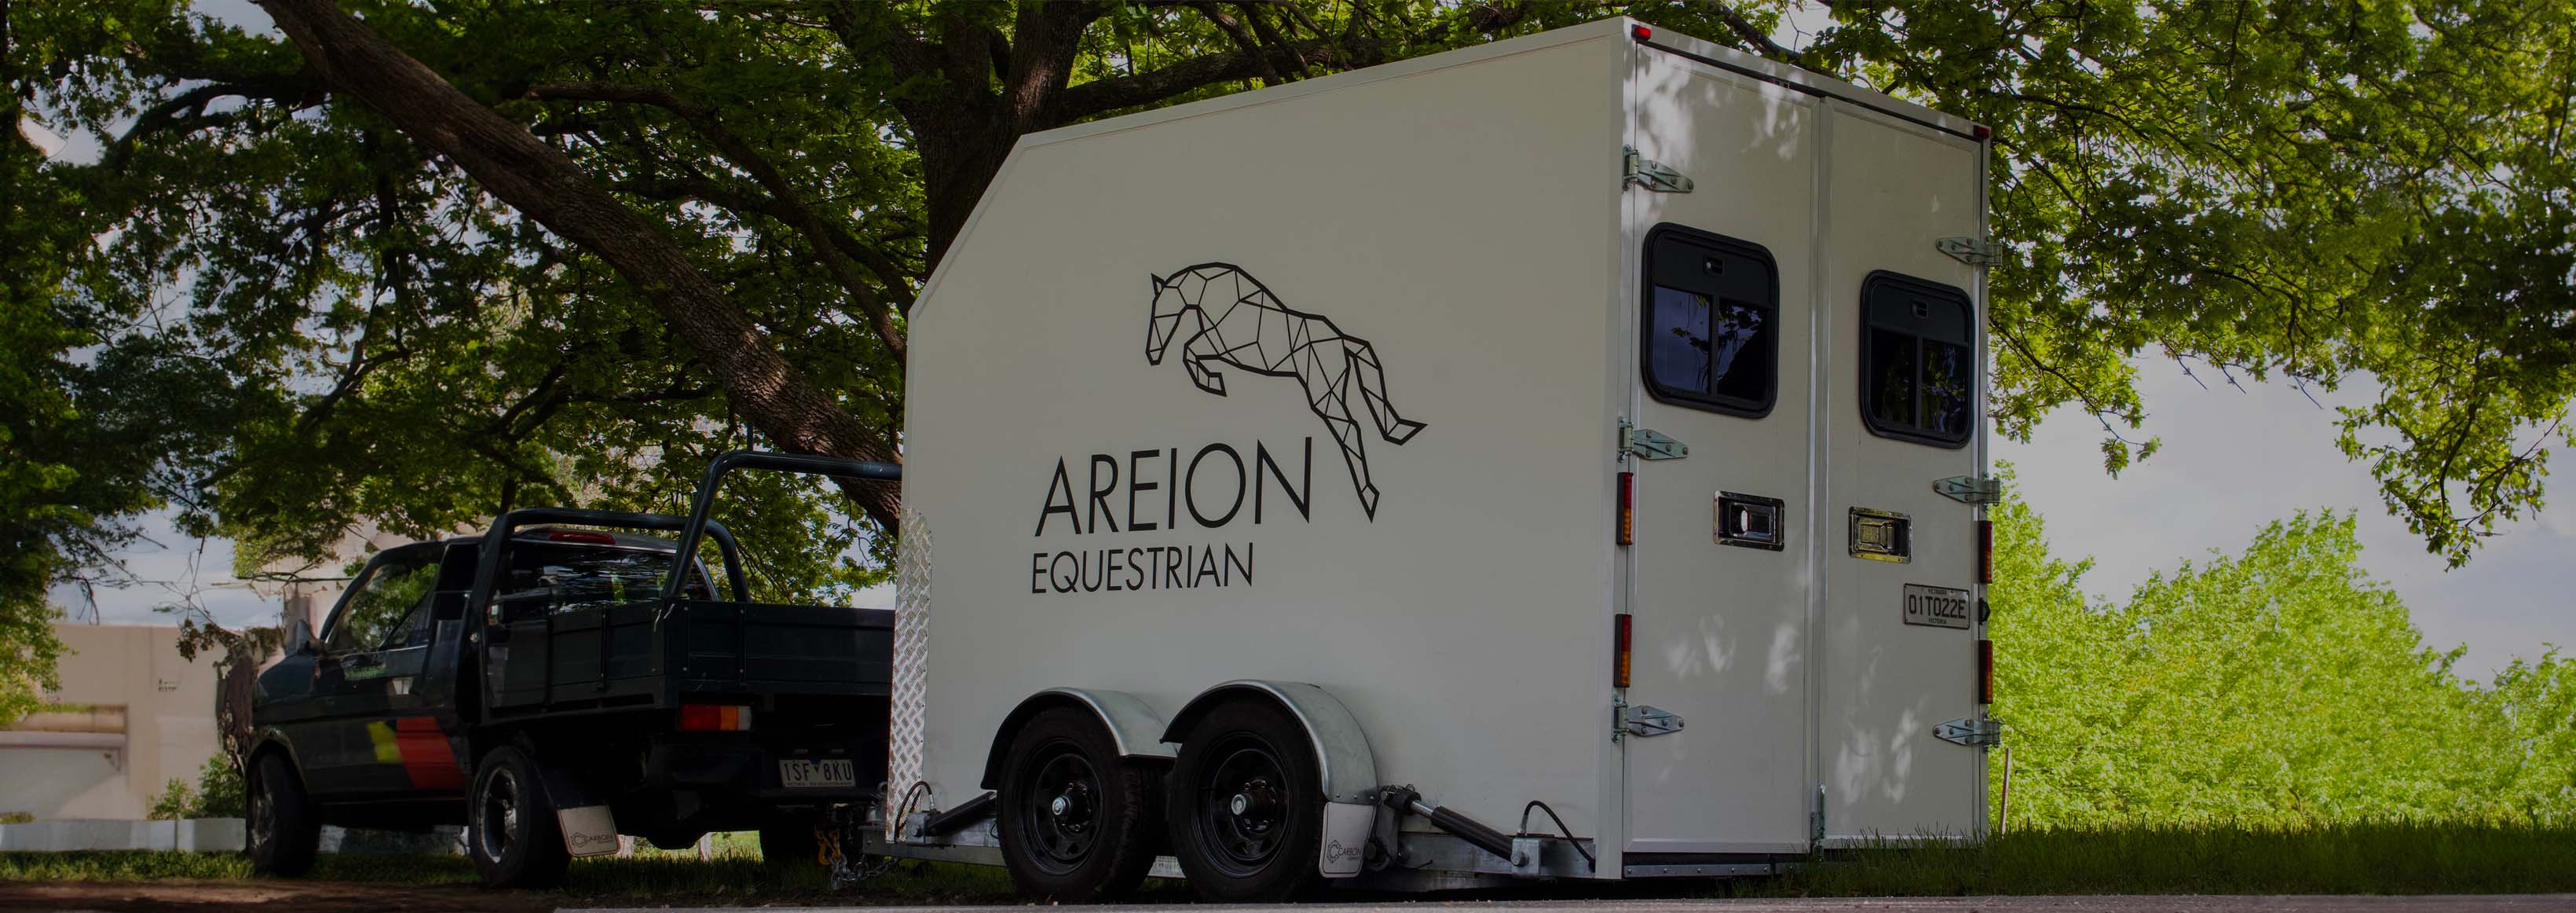 Aerion Equestrian Horse Floats